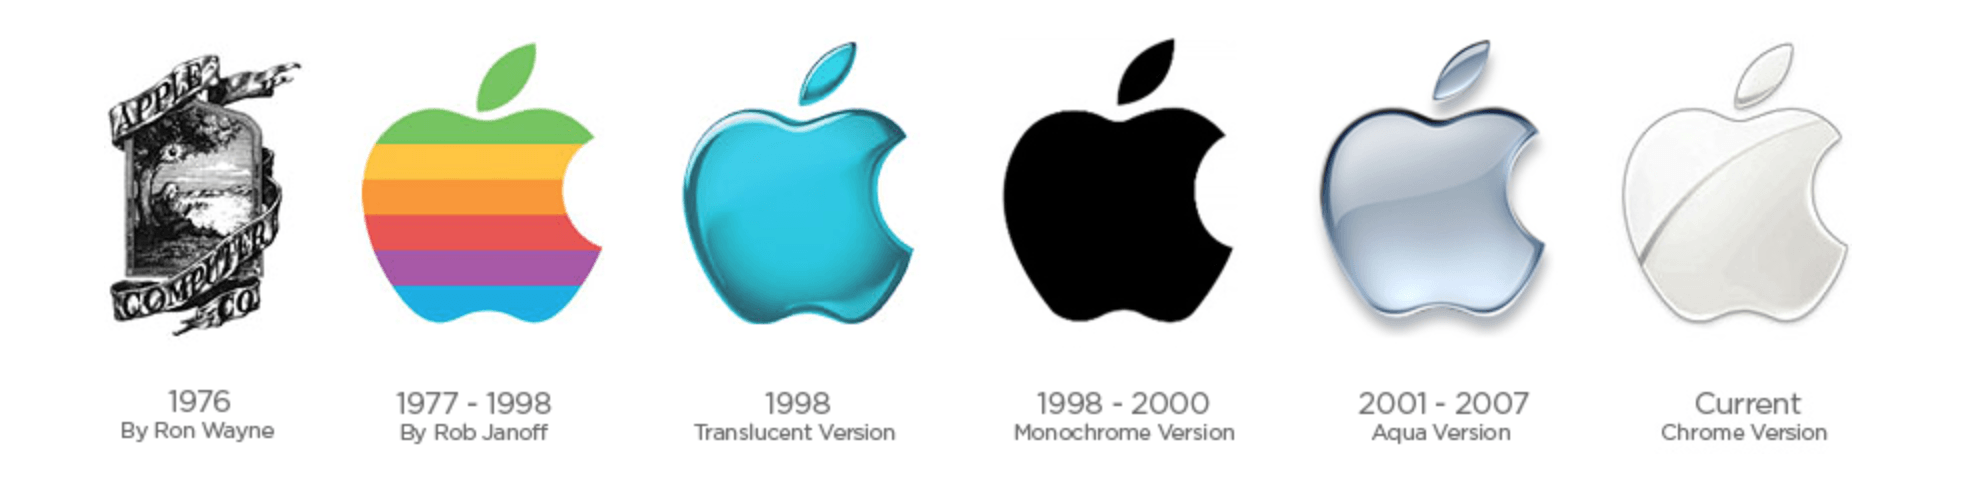 Early Apple Logo - What Makes a World Famous Logo? Keith Design